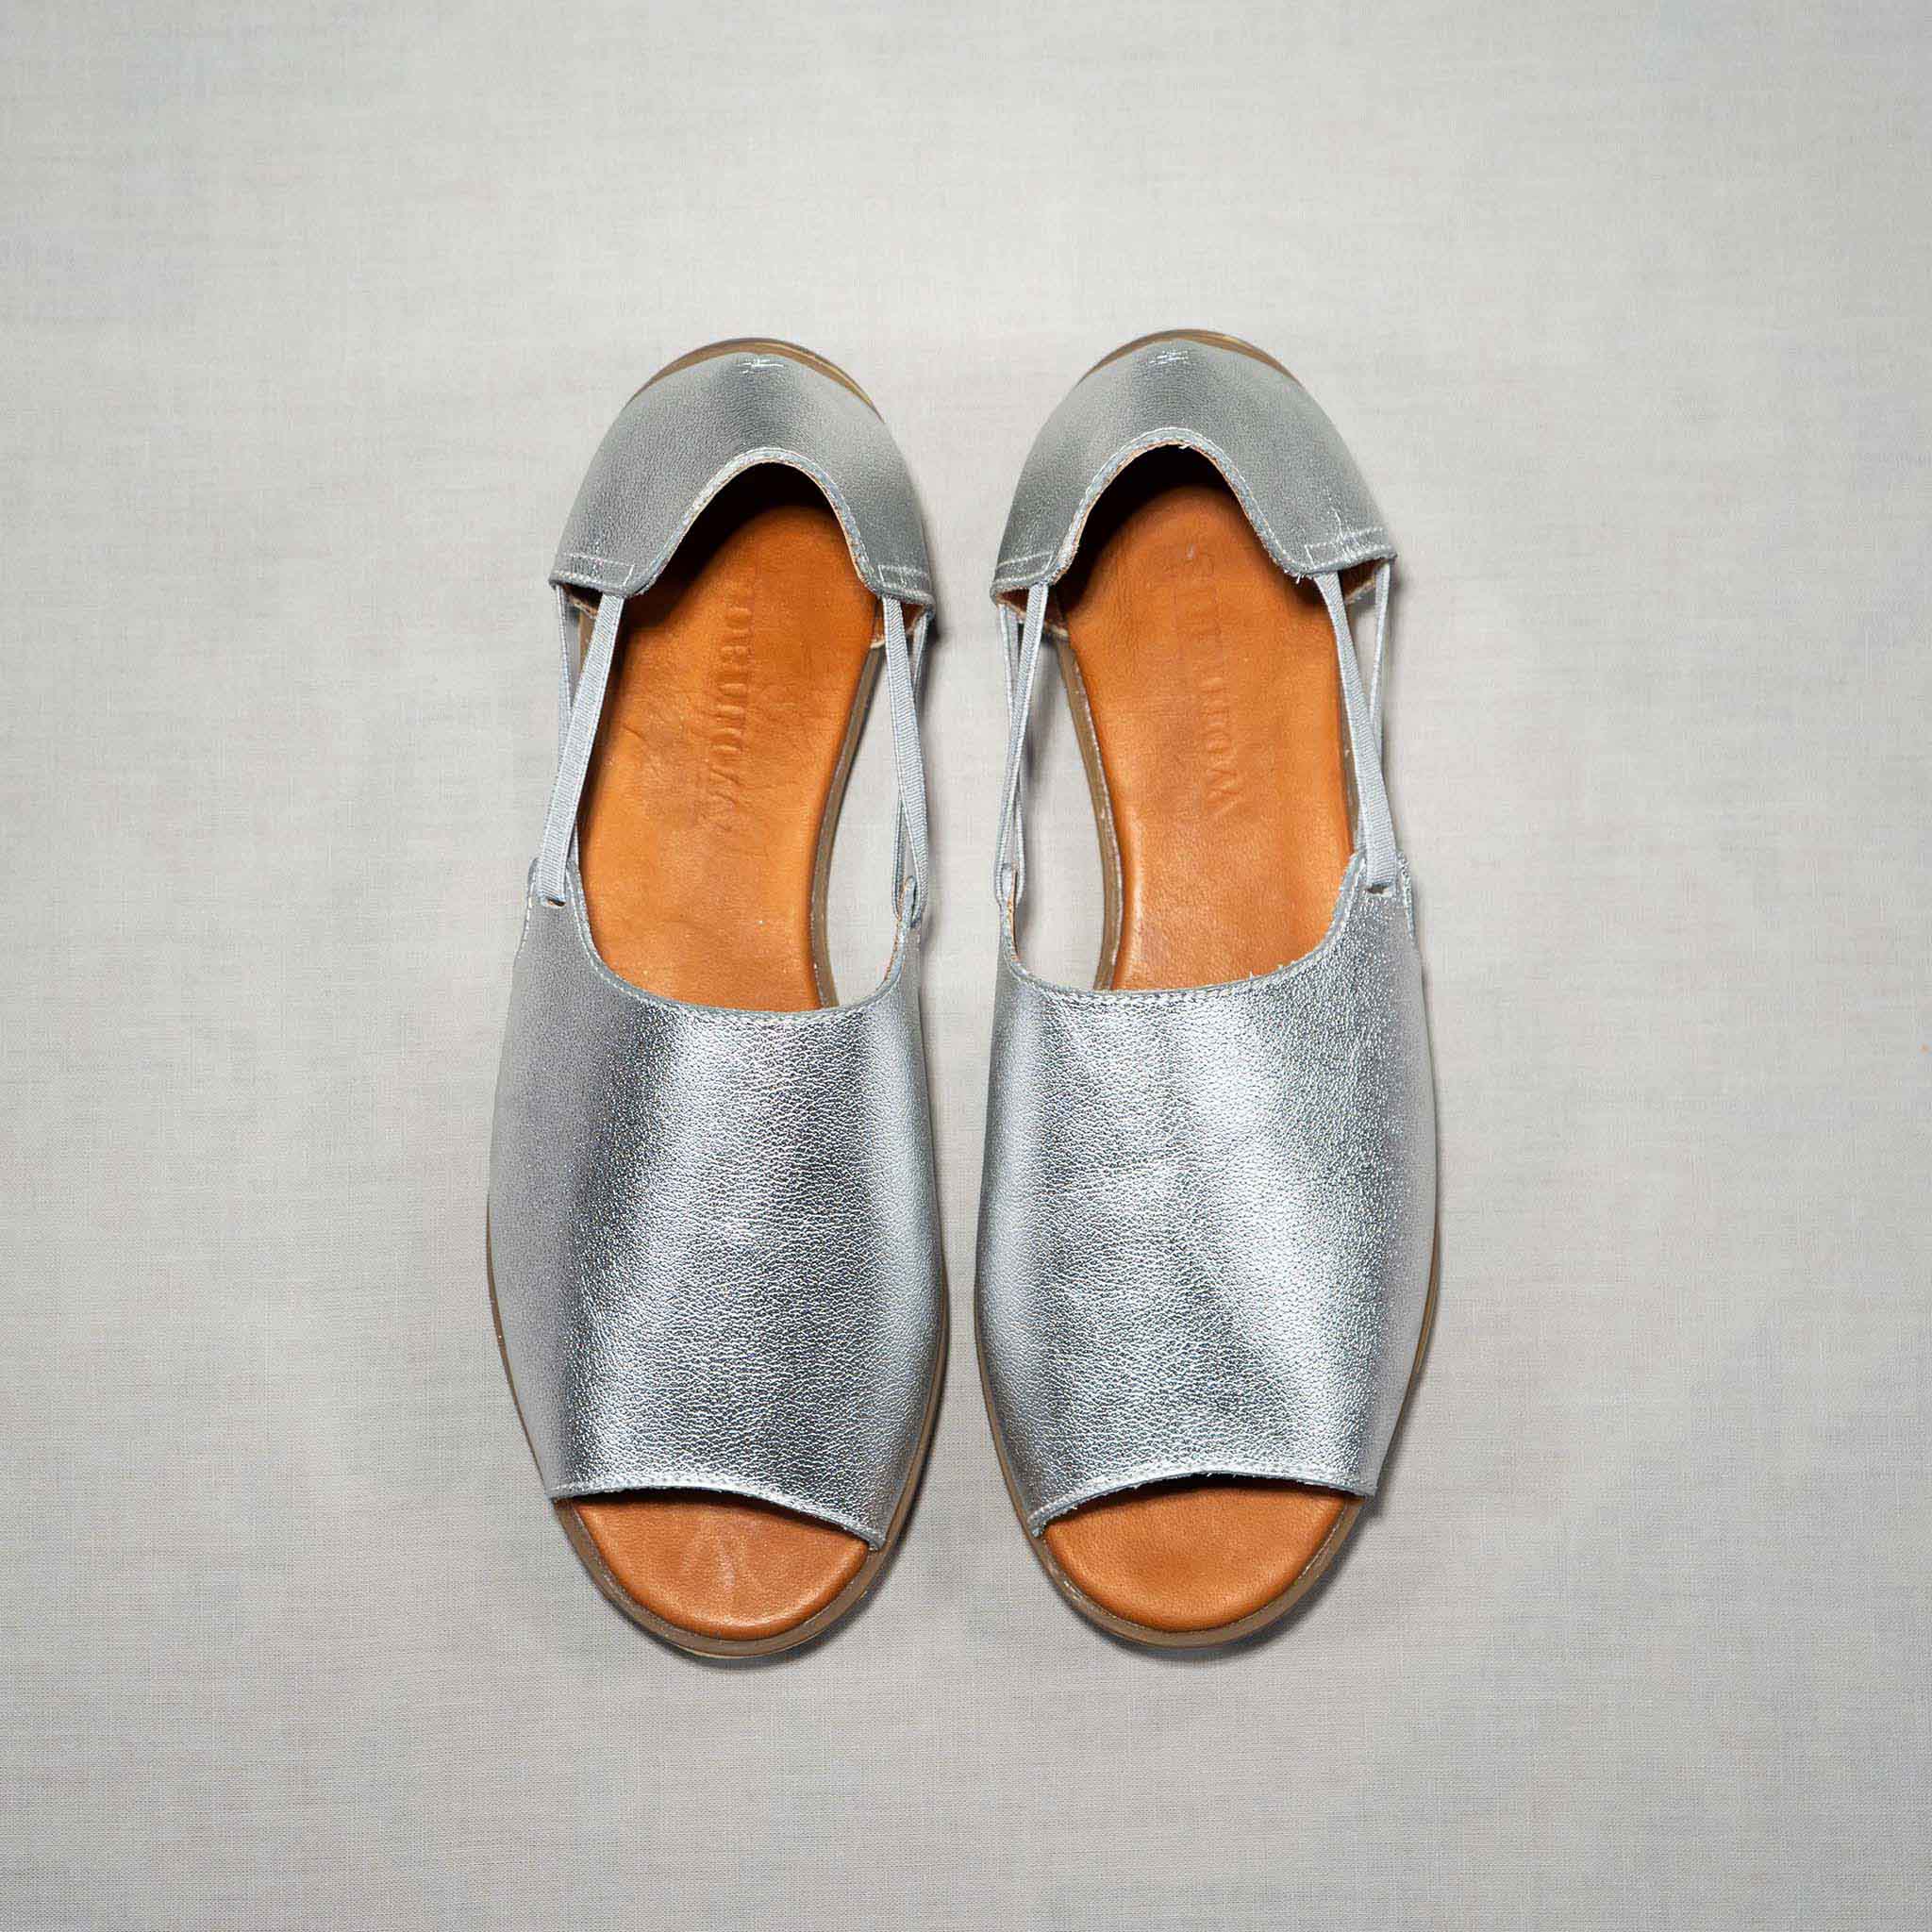 Womads silver sandals top view